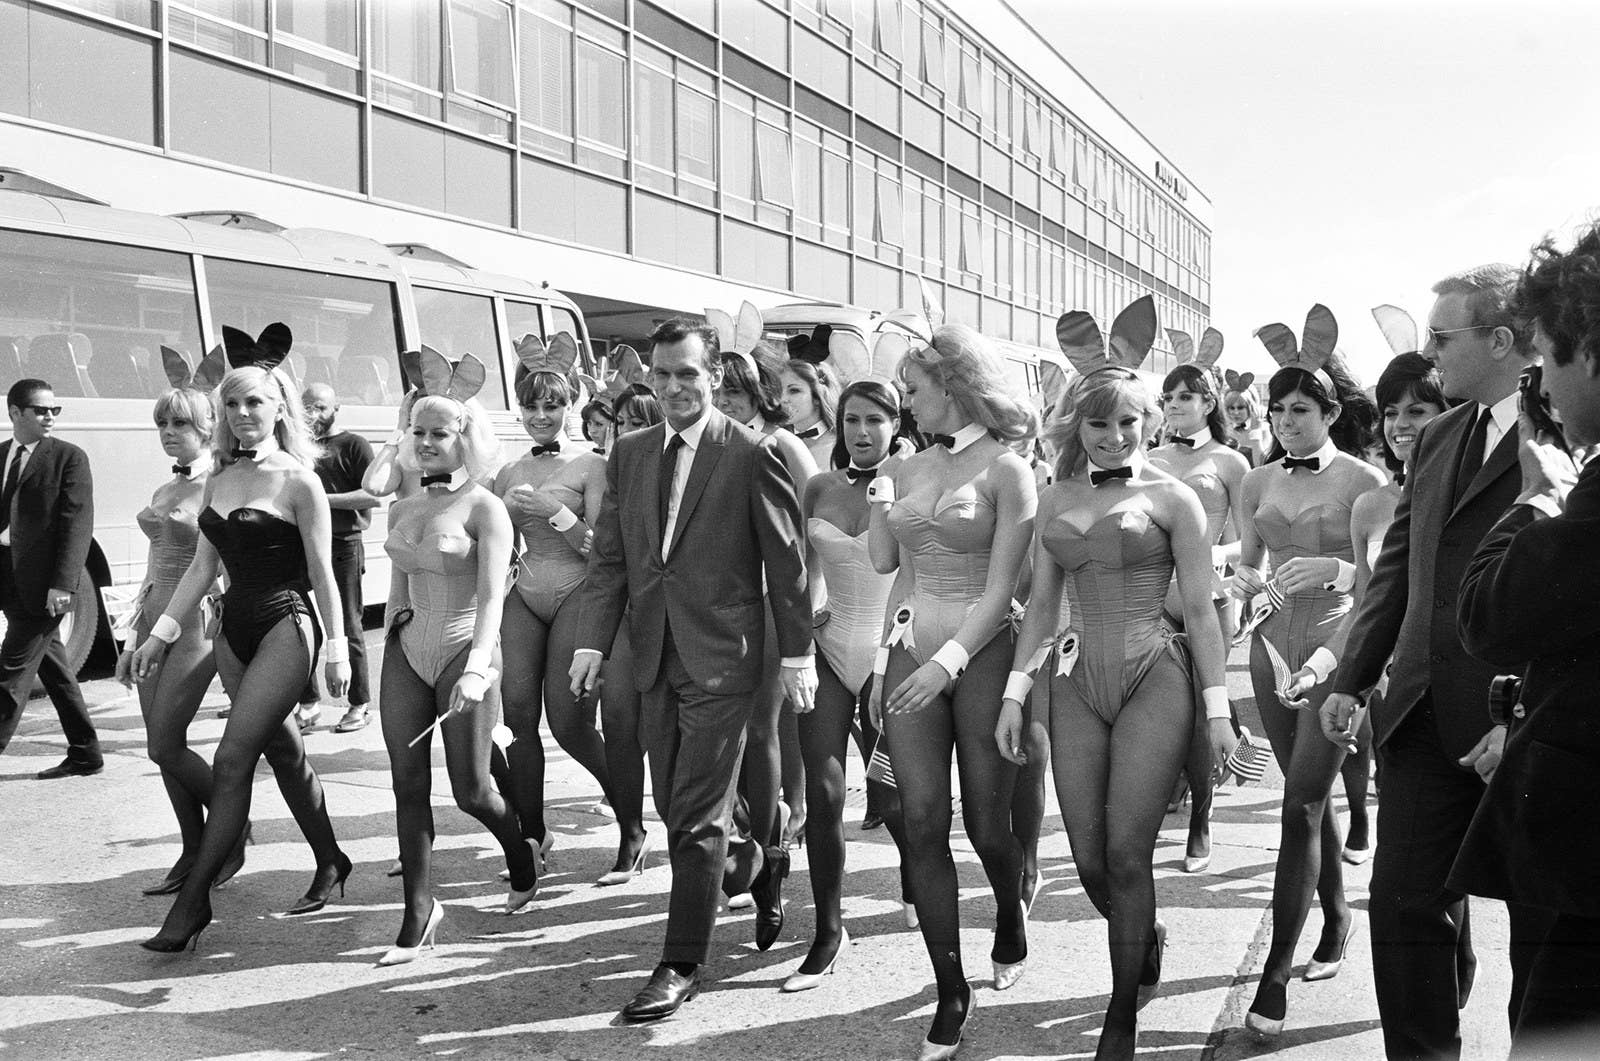 Hefner arrives with an entourage of Bunnies at London Heathrow Airport on June 25, 1966. During this trip to Britain, he opened his 16th Playboy Club, located in Park Lane, London.